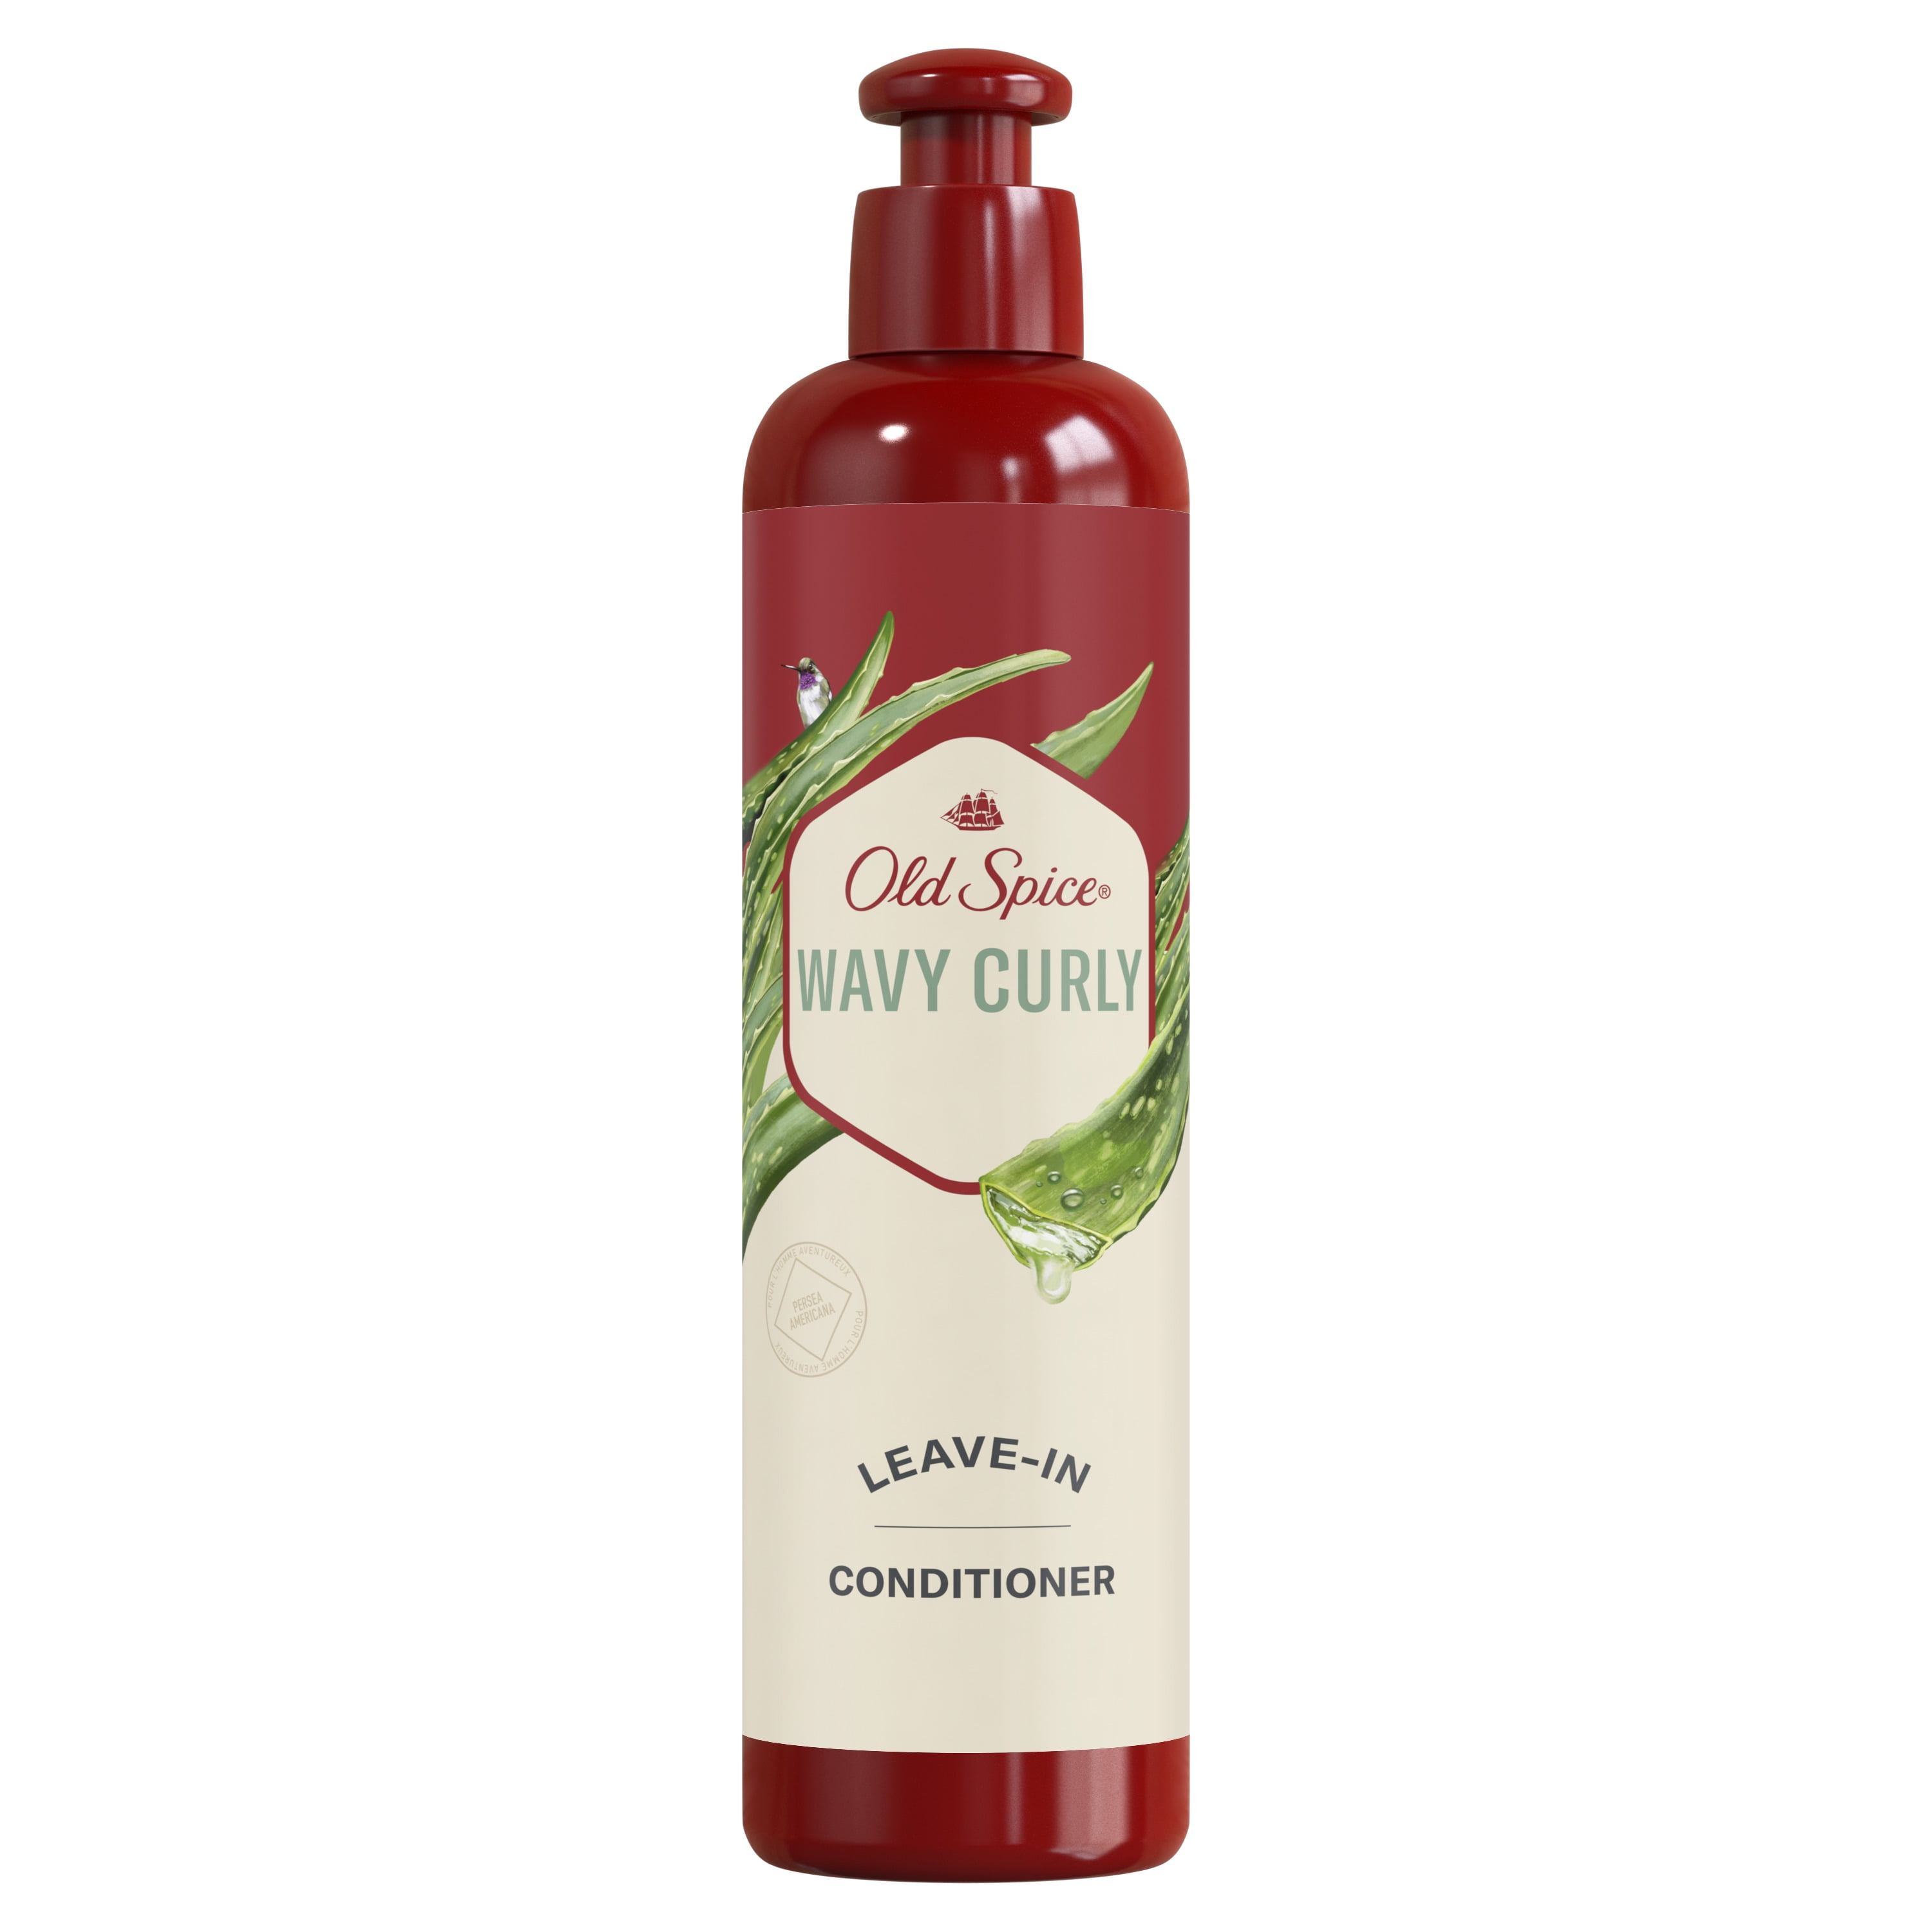 Old Spice Wavy Curly Leave-in Conditioner with Aloe & Avocado Oil, 8.5 fl oz